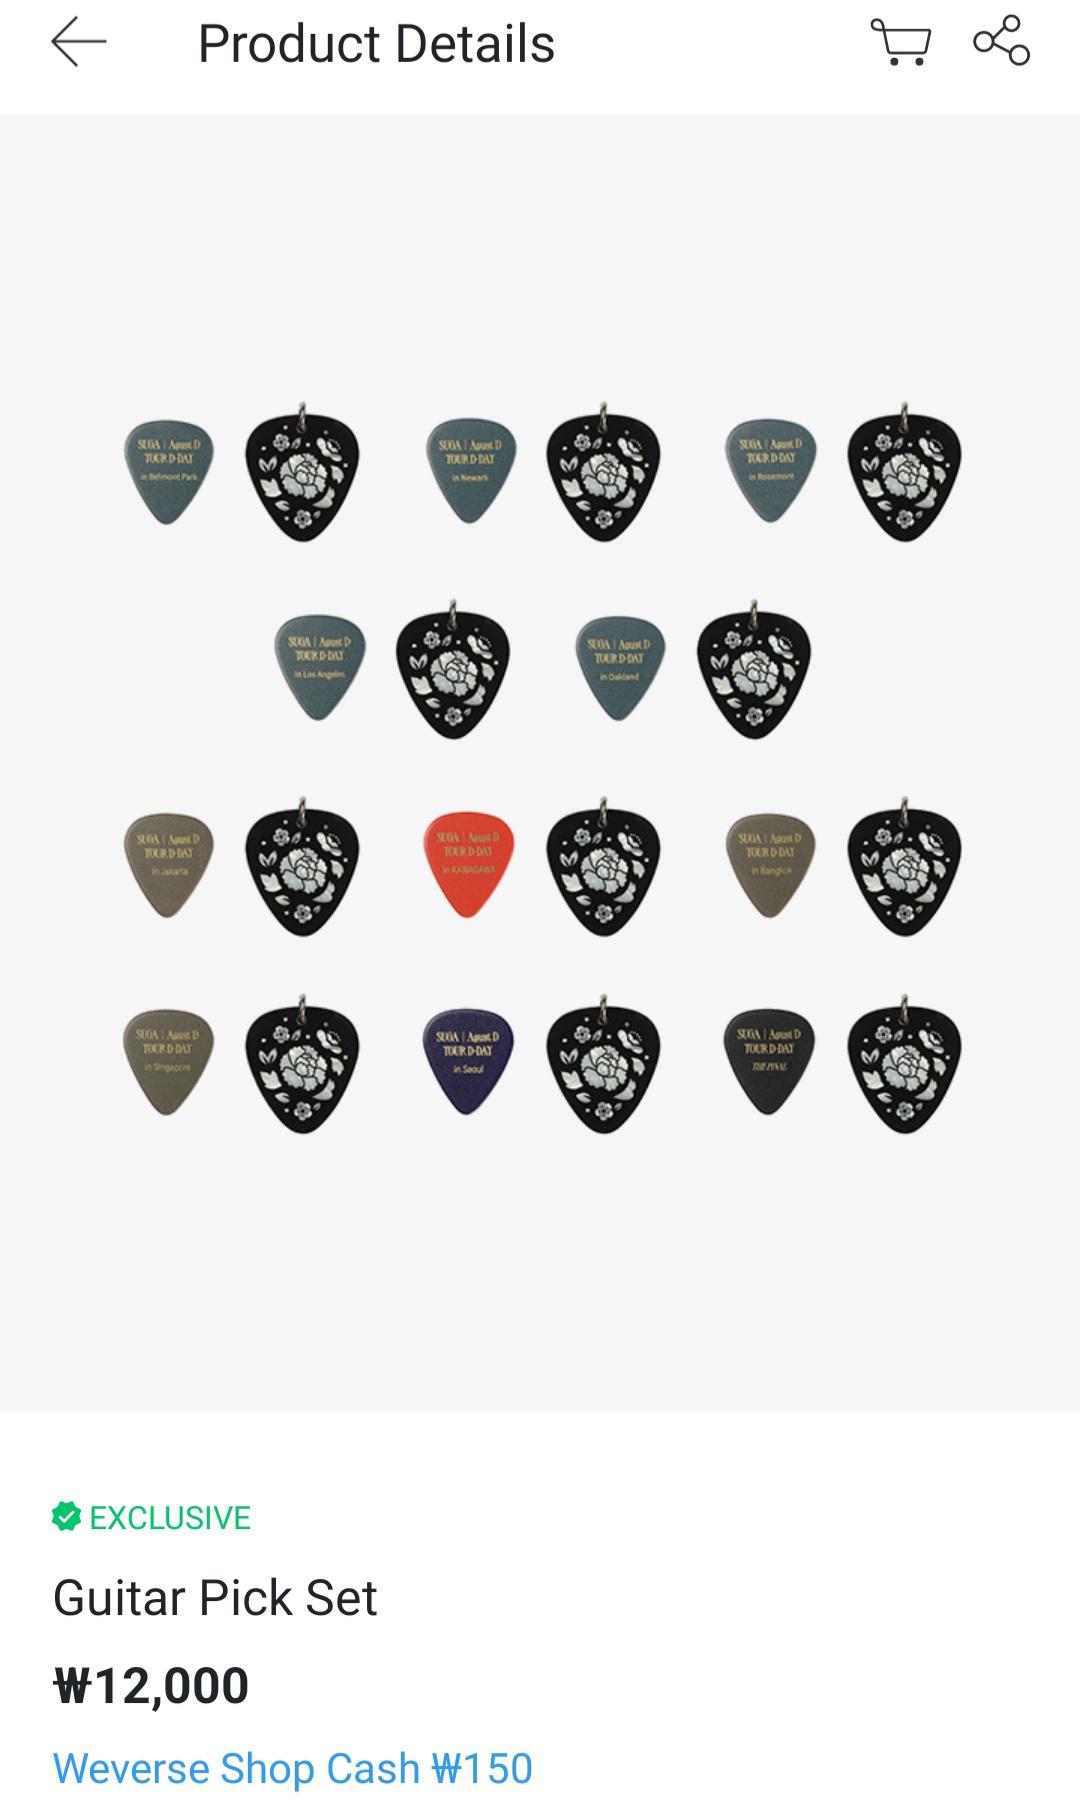 230808 The guitar pick set (SUGA|AgustD D-Day tour merch) is now available for purchase on WeverseShop